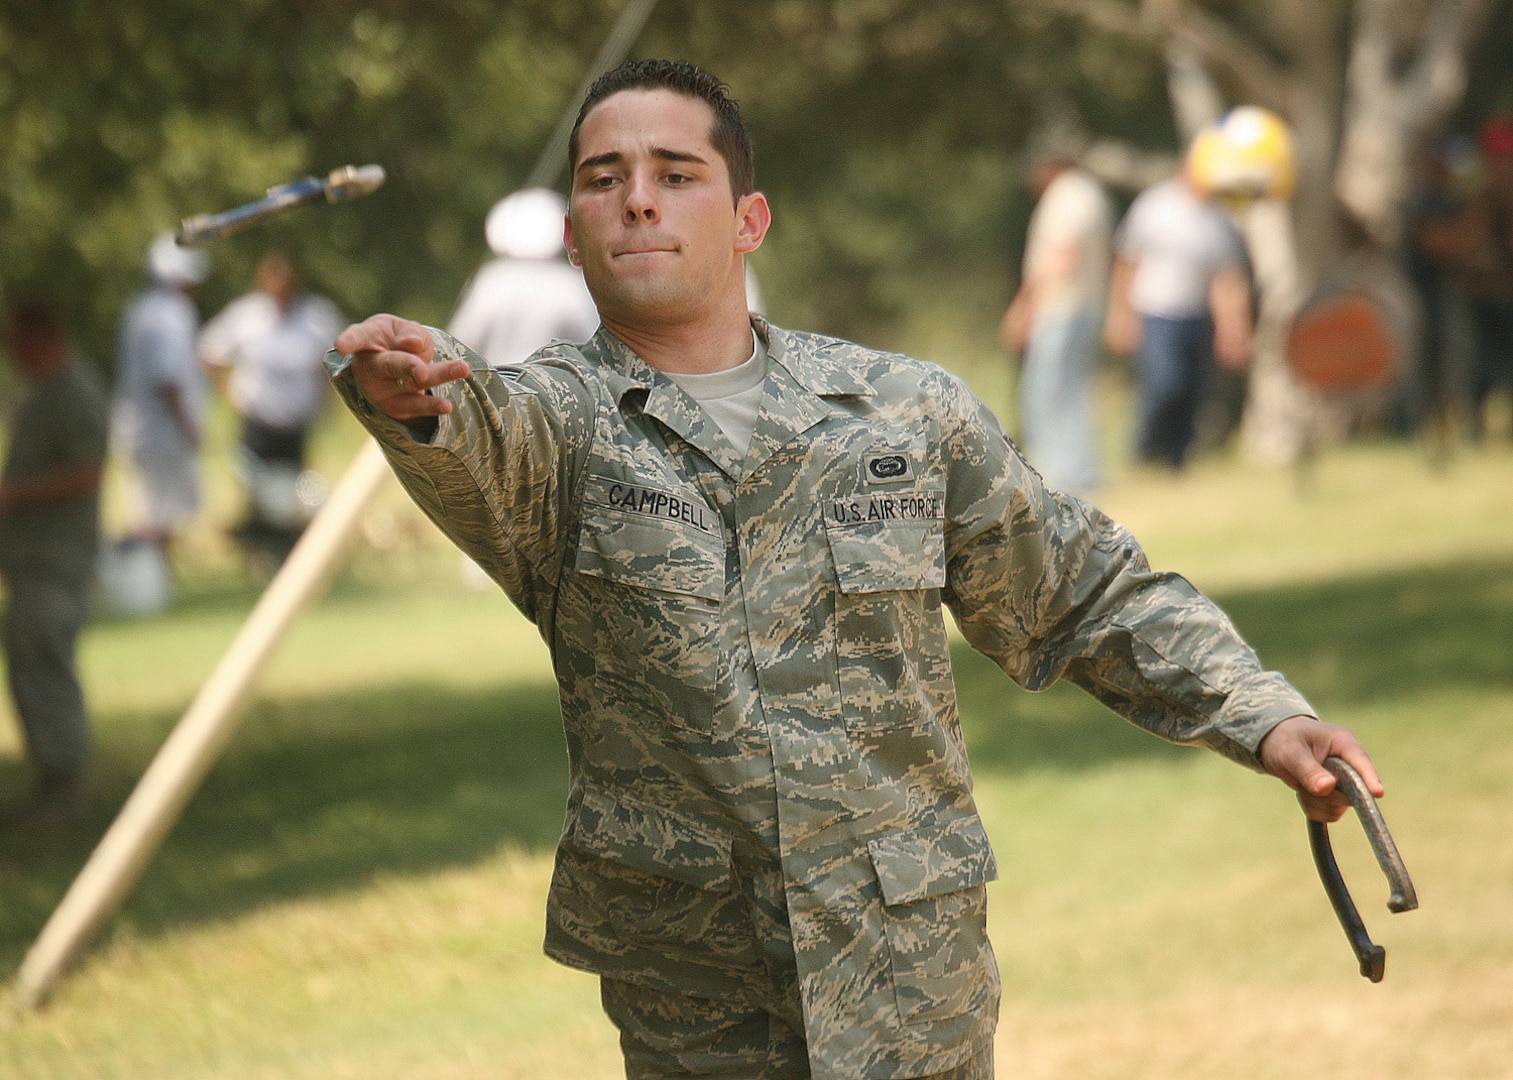 9/19/2008 - Staff Sgt. Patrick Campbell, 26th Operations Support Squadron, plays a game of horseshoes during the Junior Enlisted Appreciation Picnic. (USAF photo by Robbin Cresswell)